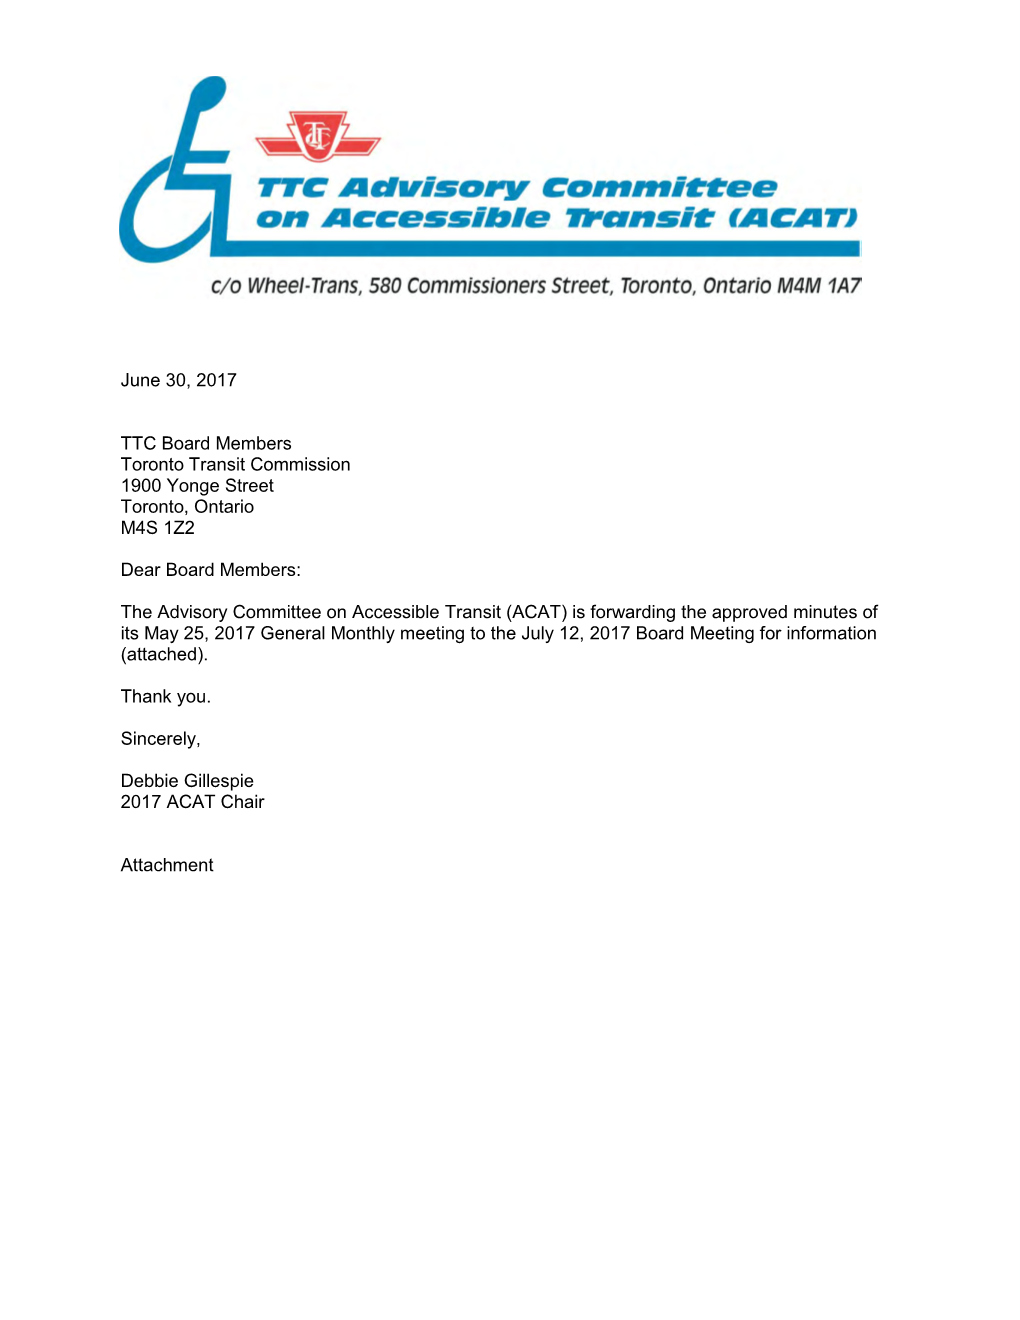 ACAT) Is Forwarding the Approved Minutes of Its May 25, 2017 General Monthly Meeting to the July 12, 2017 Board Meeting for Information (Attached)